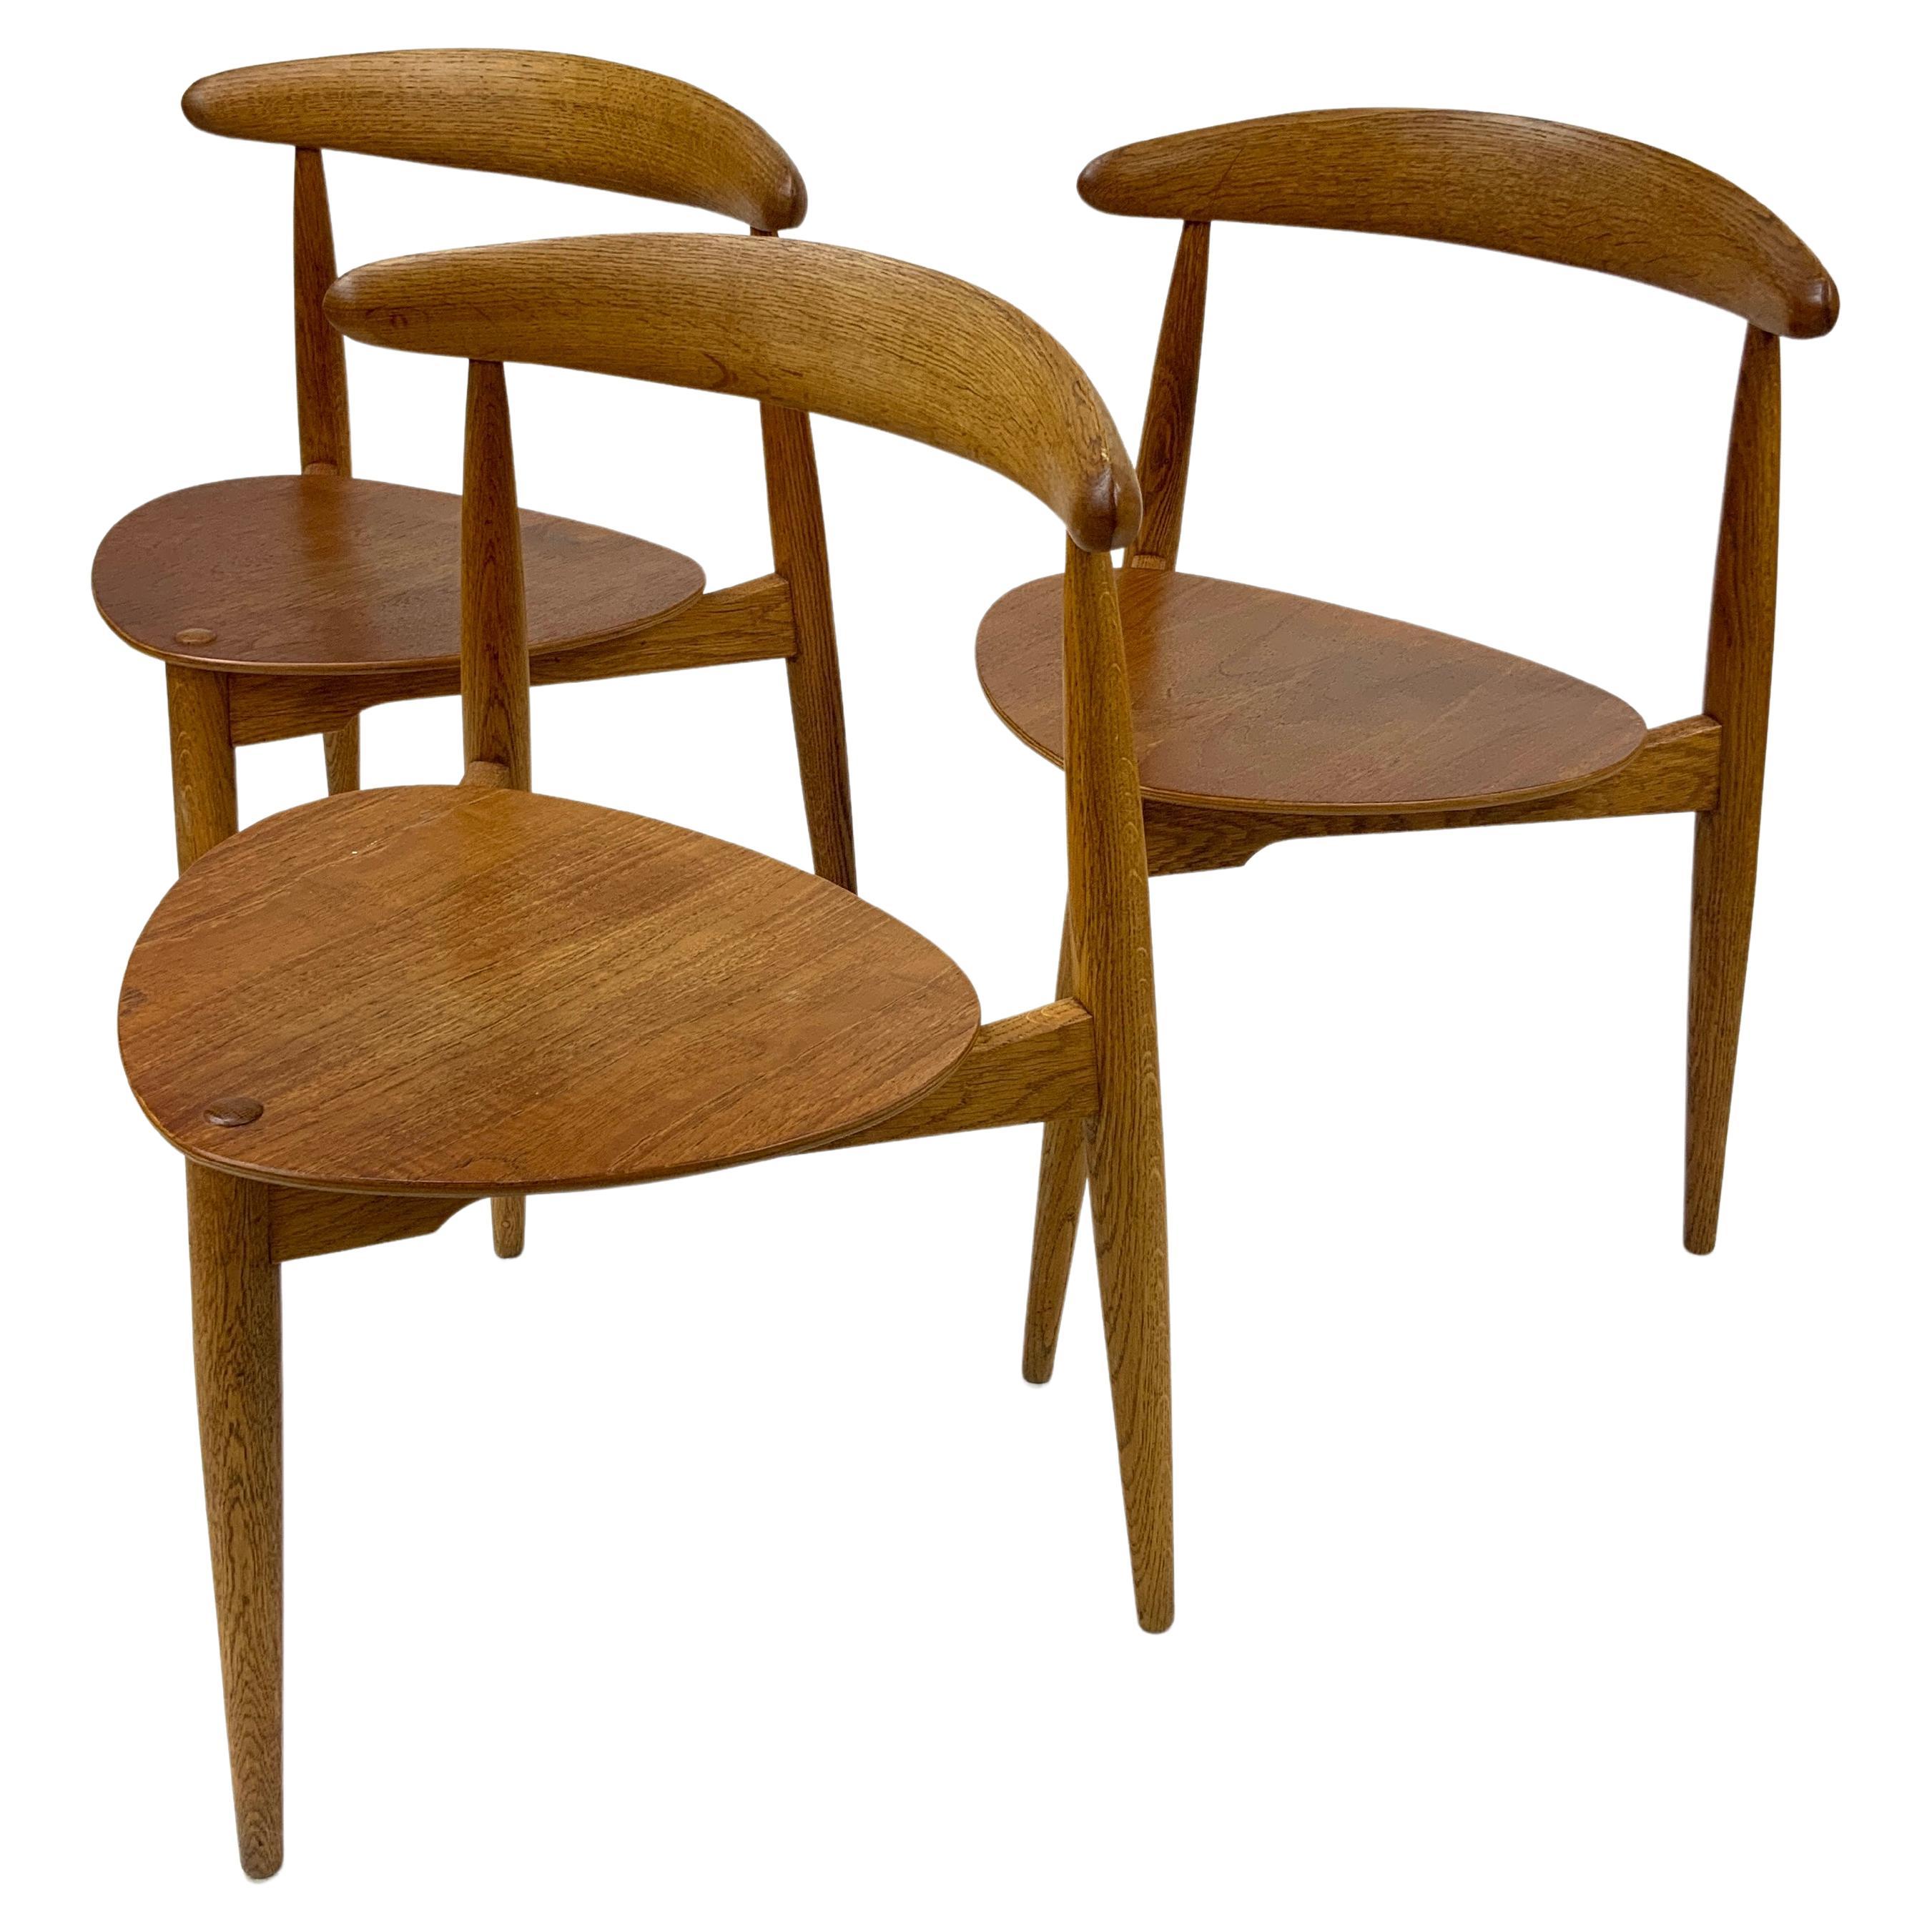 Set of 3 Hans Wegner Fh4103 “Heart” Dining Chairs, 1953 For Sale